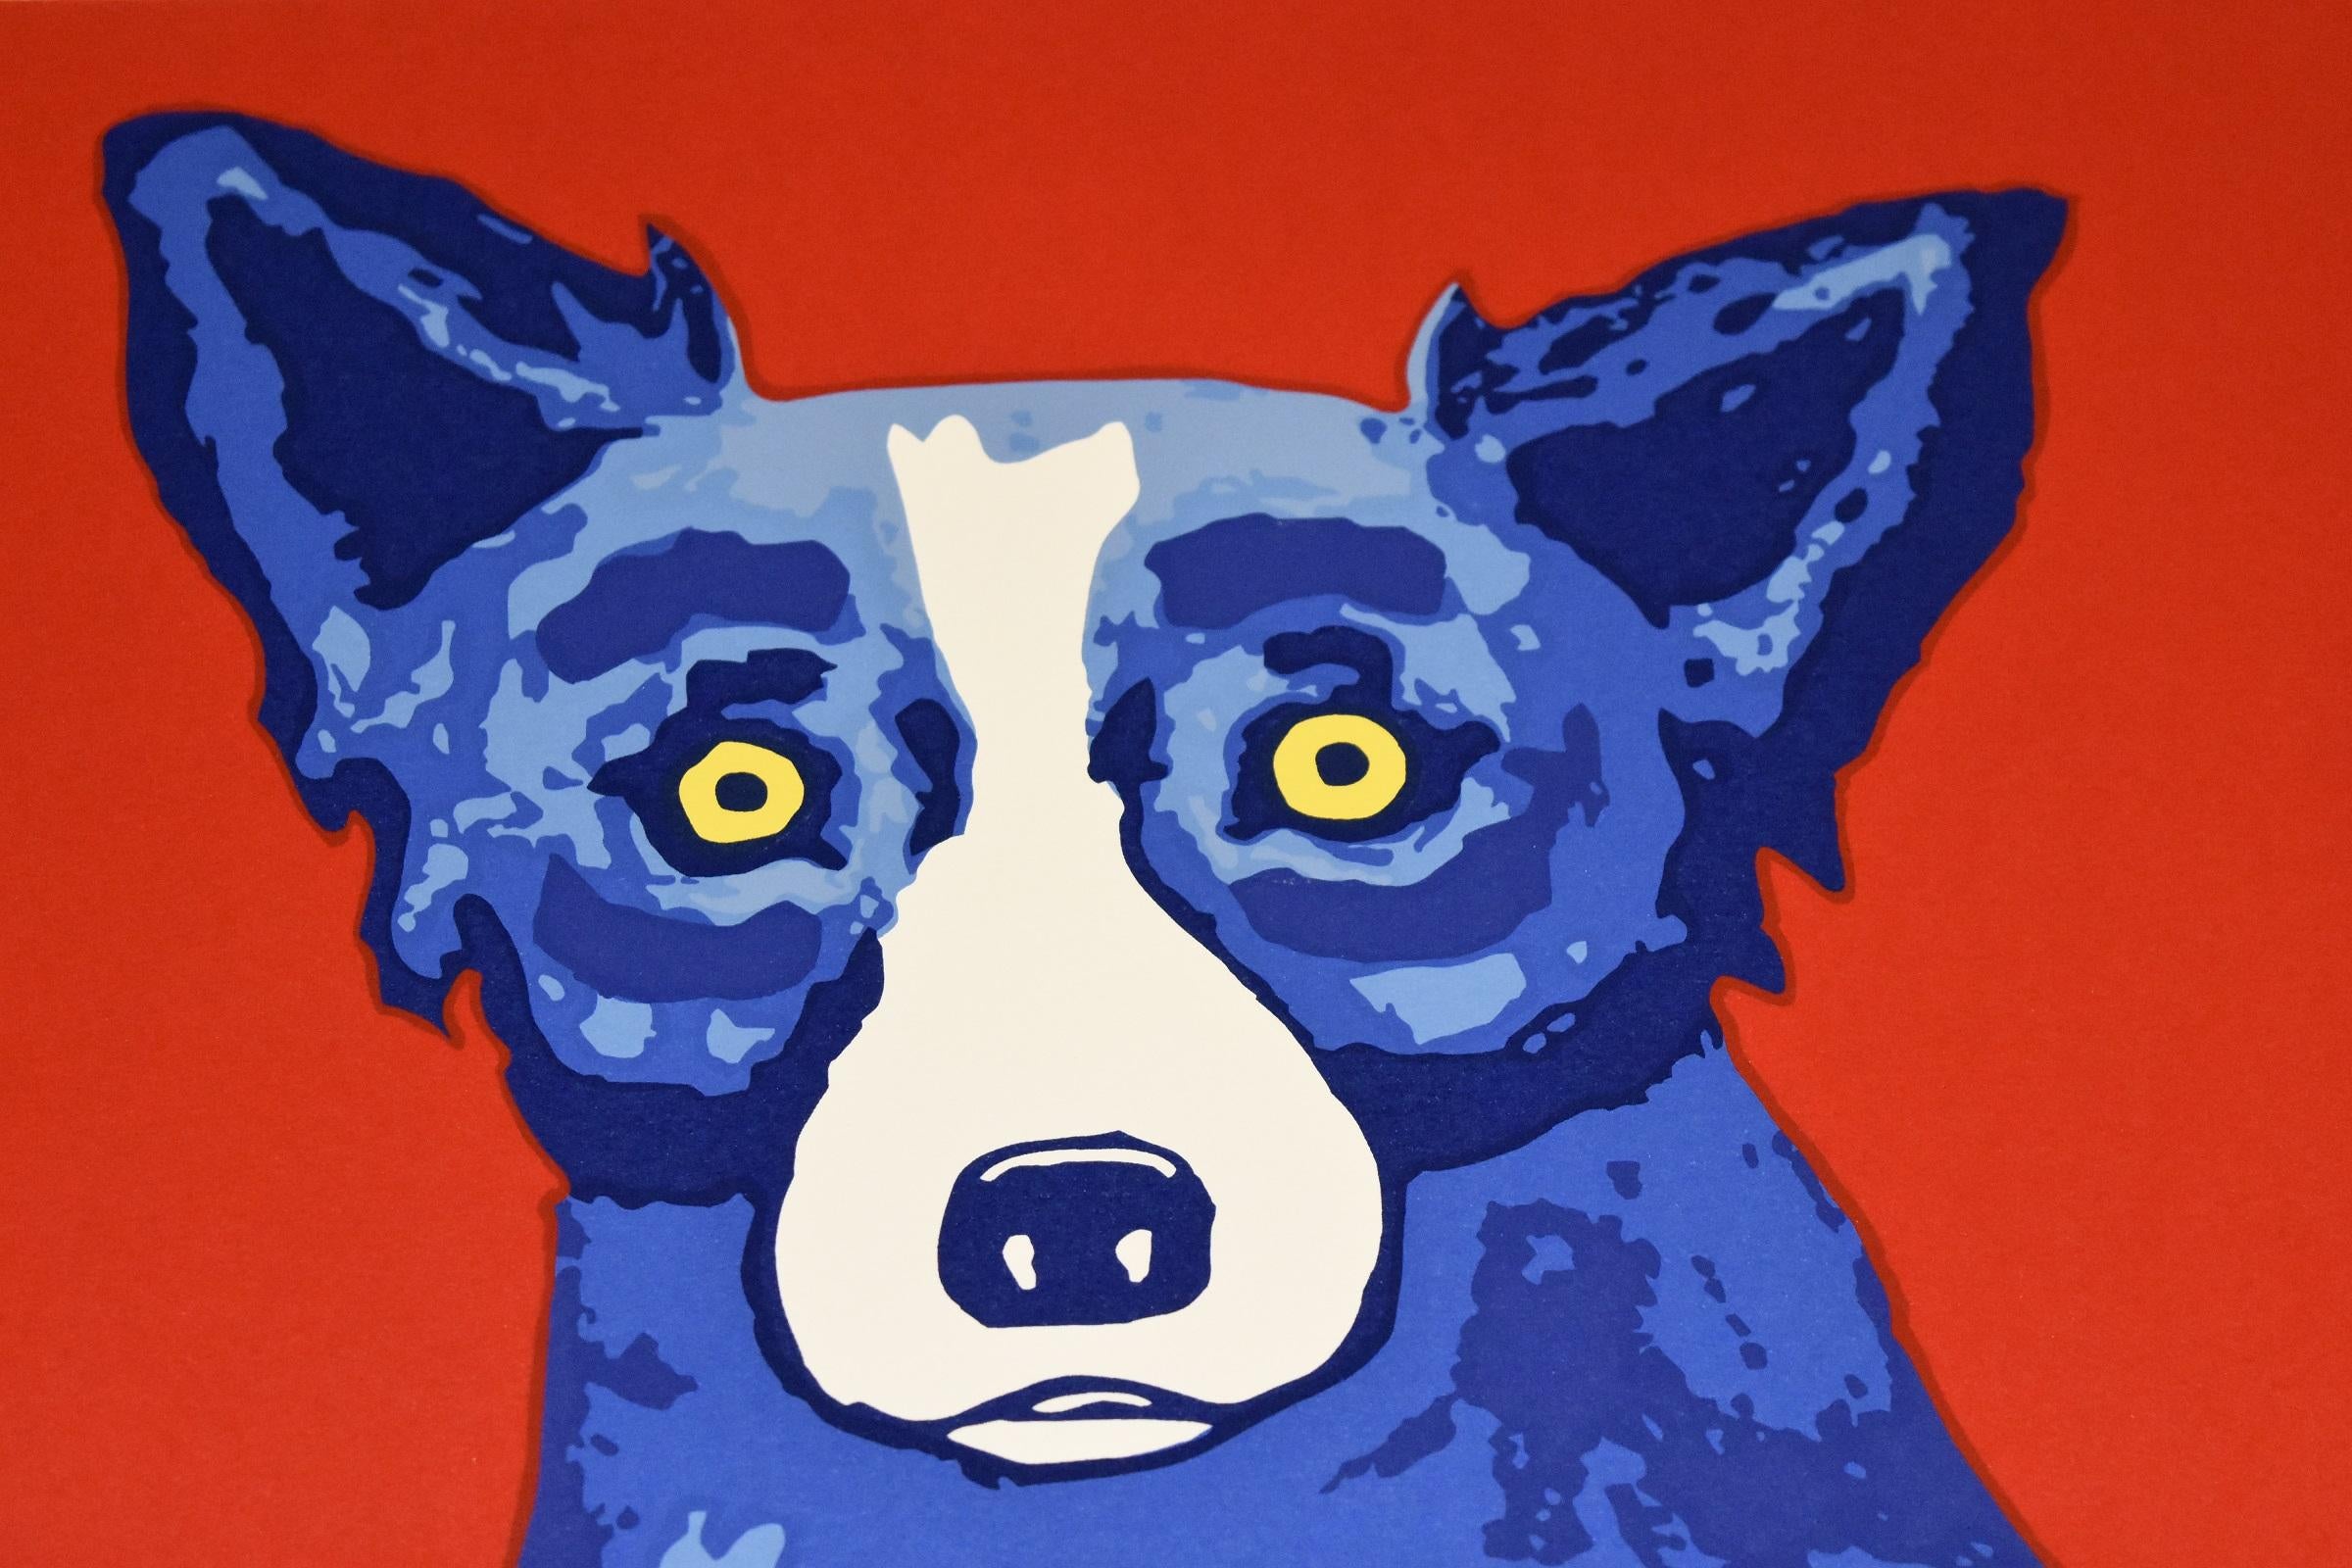 This Blue Dog work consists of 2 blue dogs: one on a black background and one on a red background.  Both dogs have soulful yellow eyes.  This pop art animal original silkscreen print on paper is hand-signed by the artist.

Artist:  George